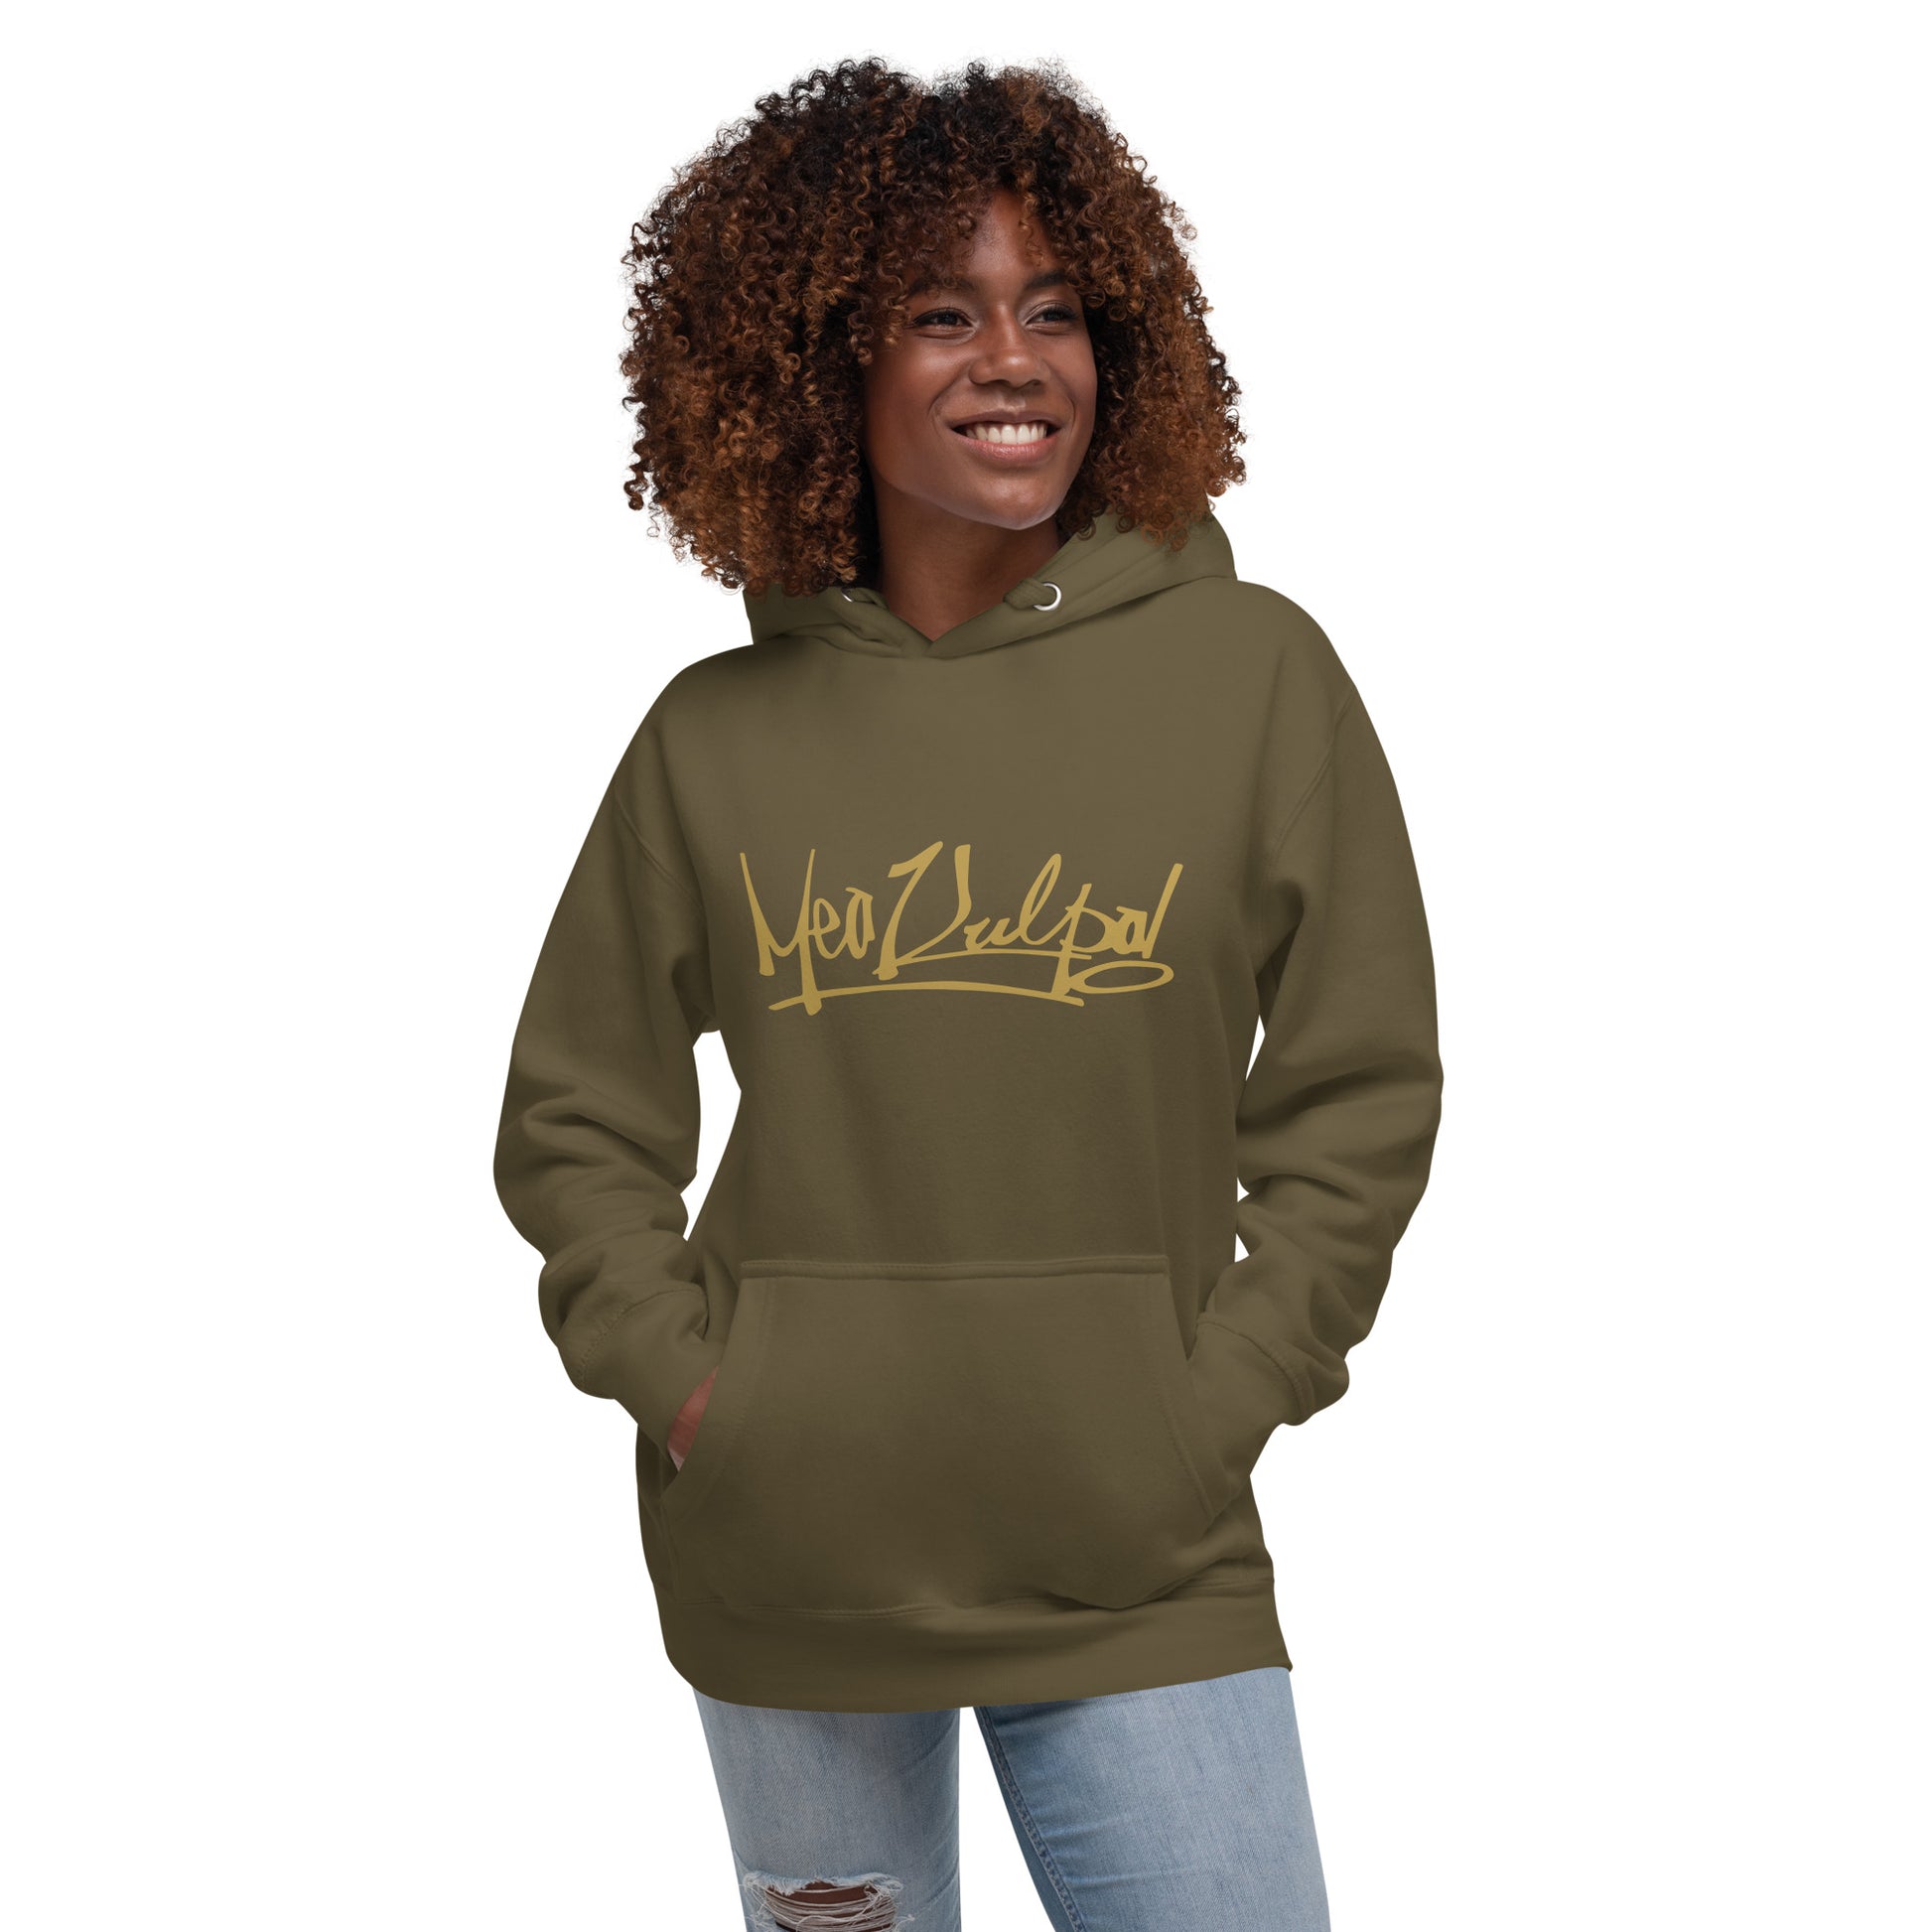 Introducing the MeaKulpa Premium Hoodie – where sophistication meets streetwear in a perfect harmony of style. With a military-green premium hoodie, meticulously crafted for those who appreciate the finer things in life. With a striking MeaKulpa print in matt gold adorns the front, adding a touch of opulence to your ensemble. The gold detailing captures the essence of exclusivity, making this hoodie a statement piece for those who seek a blend of luxury and urban flair.